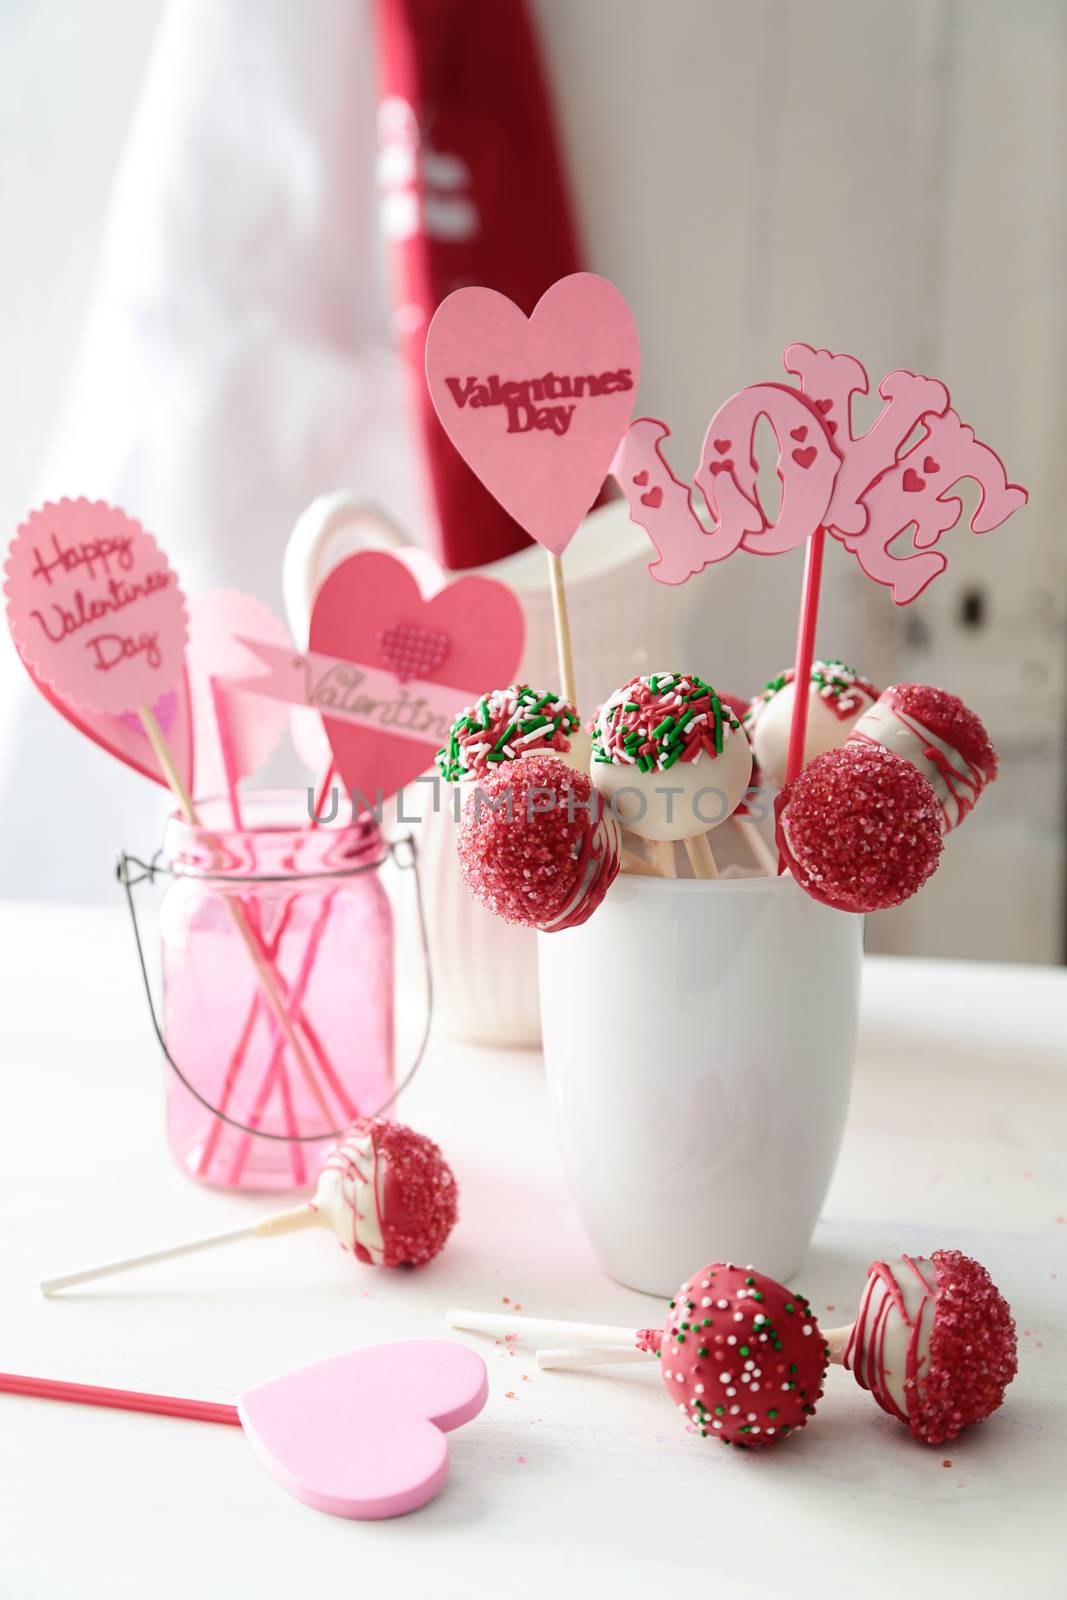 Closeup of cake pops with decorations for Valentine's Day by Sandralise